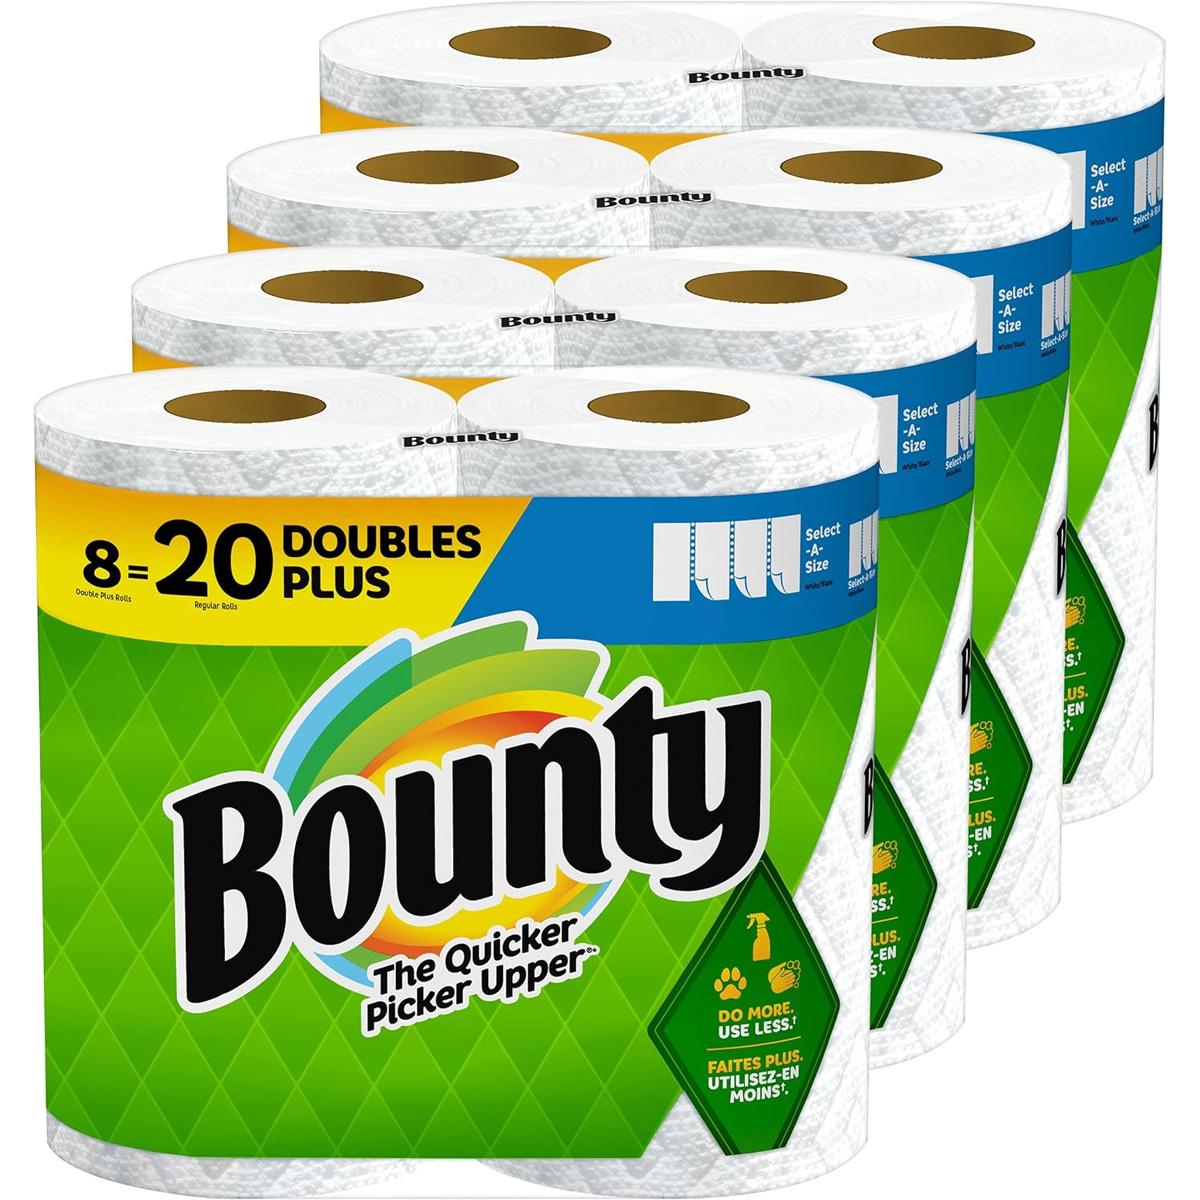 Bounty Double Plus Rolls Paper Towel 24 Pack with $10 Credit for $50.55 Shipped